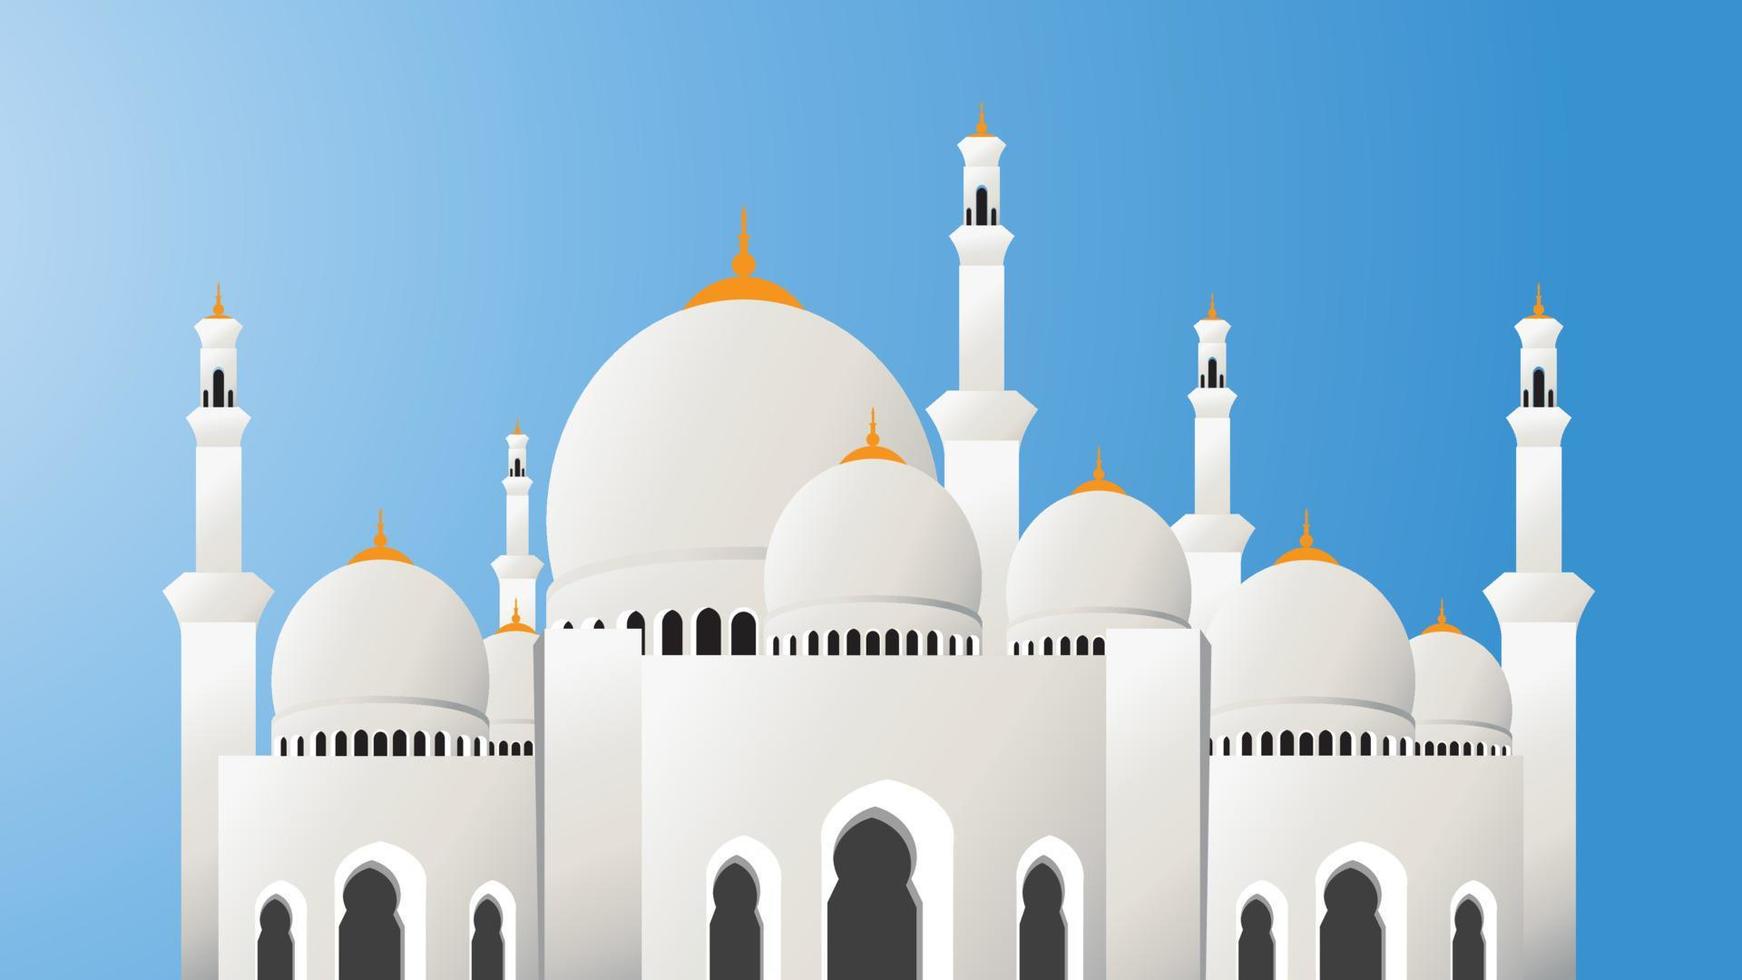 Abu Dhabi Mosque Vector with Sheikh Zayed Grand Flat design